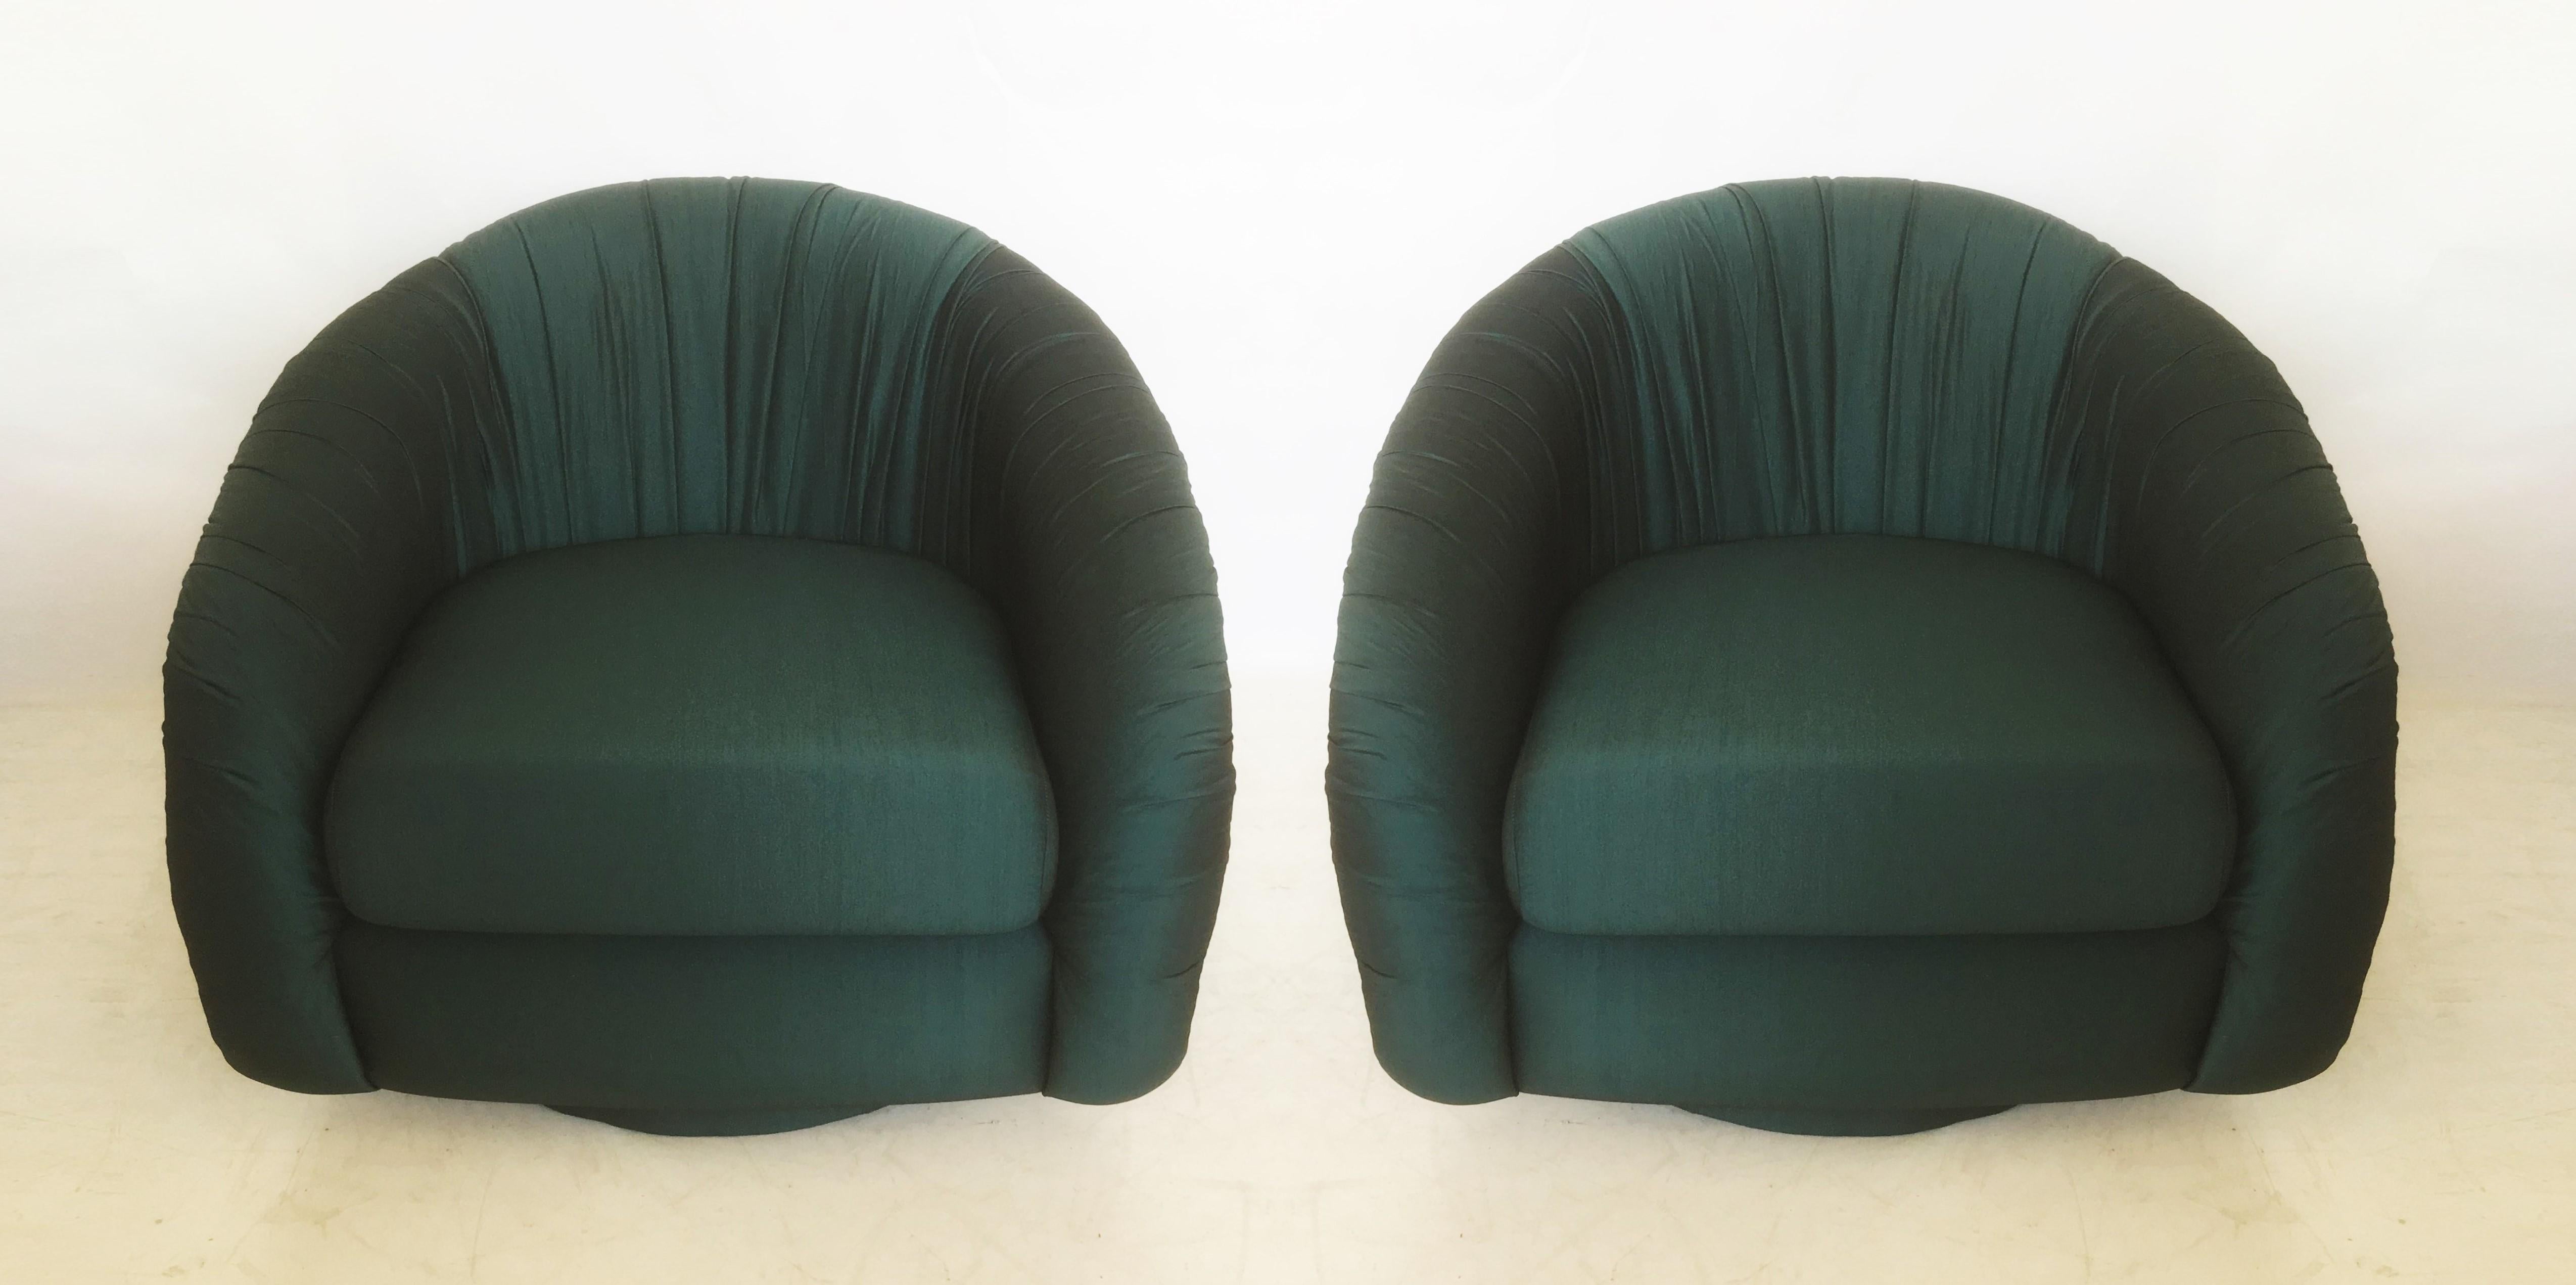 Late 20th Century Pair of Mid-century Swivel Chairs in the style of Milo Baughman for Directional For Sale